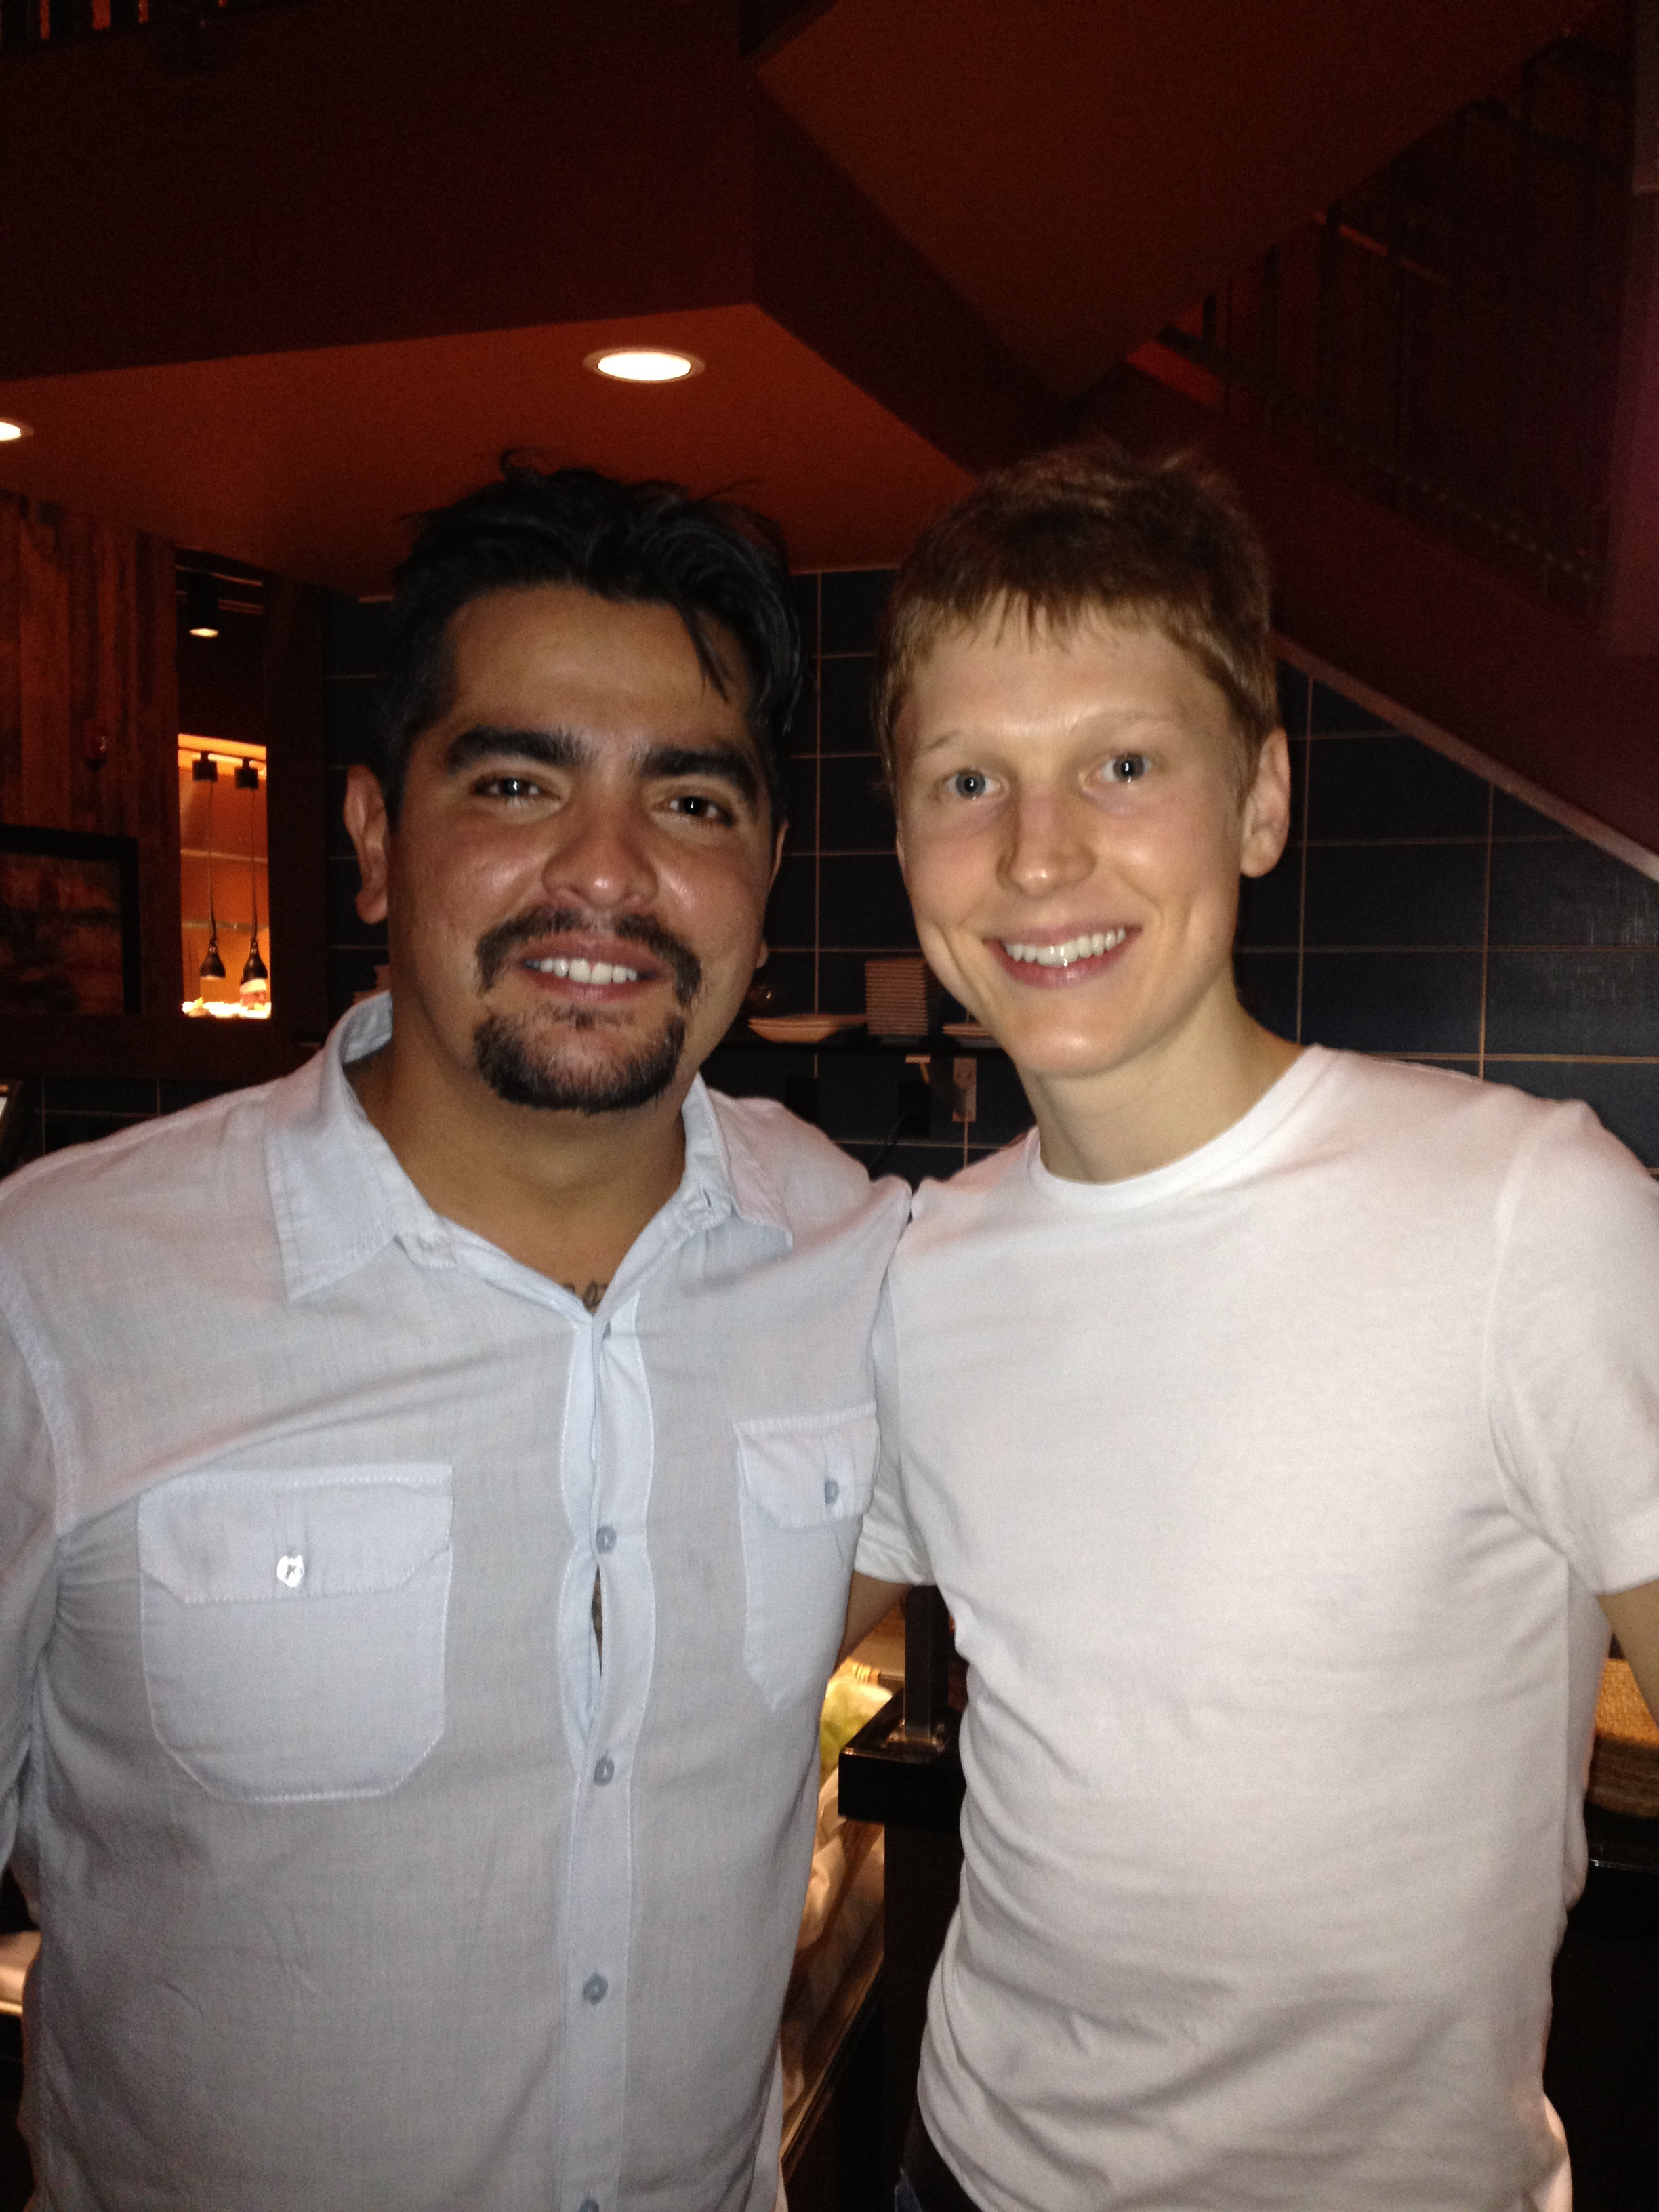 Hanging with one of my favorite chefs Aaron Sanchez.